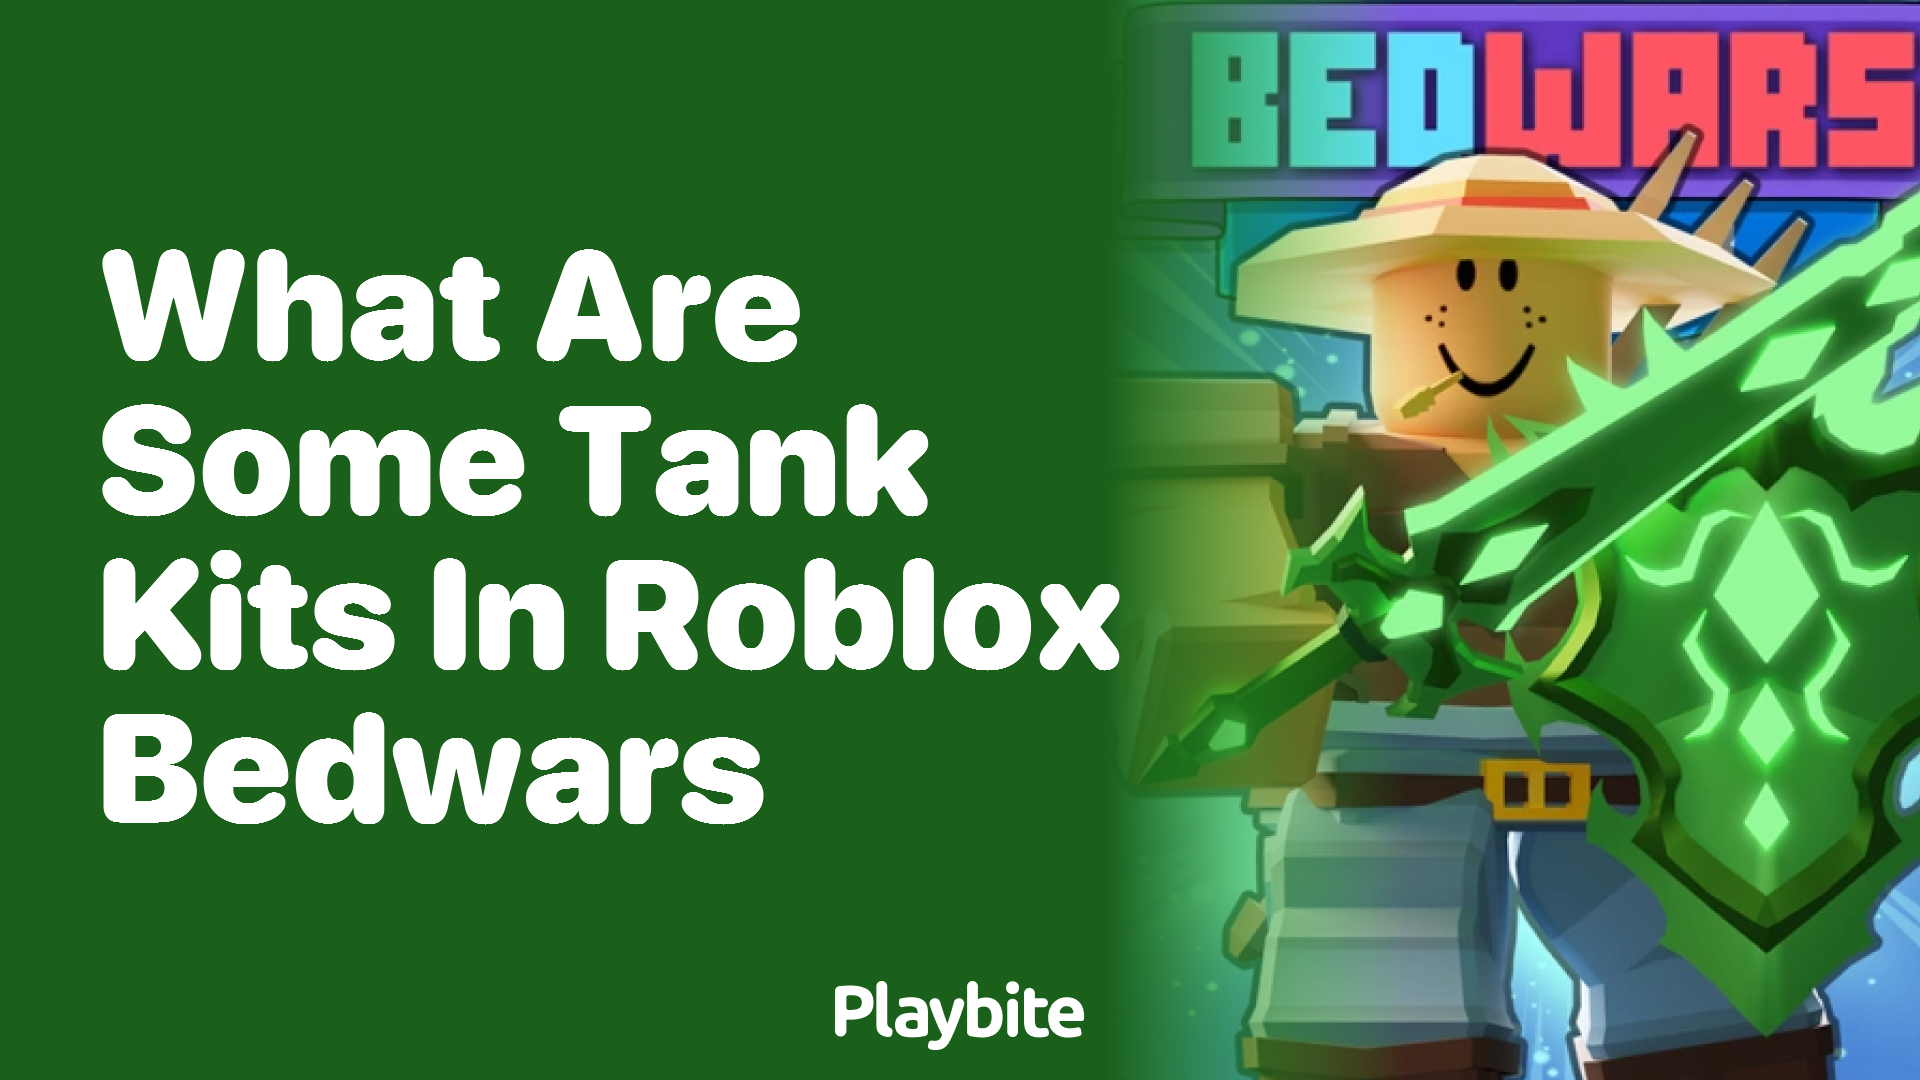 What Are Some Tank Kits in Roblox Bedwars?